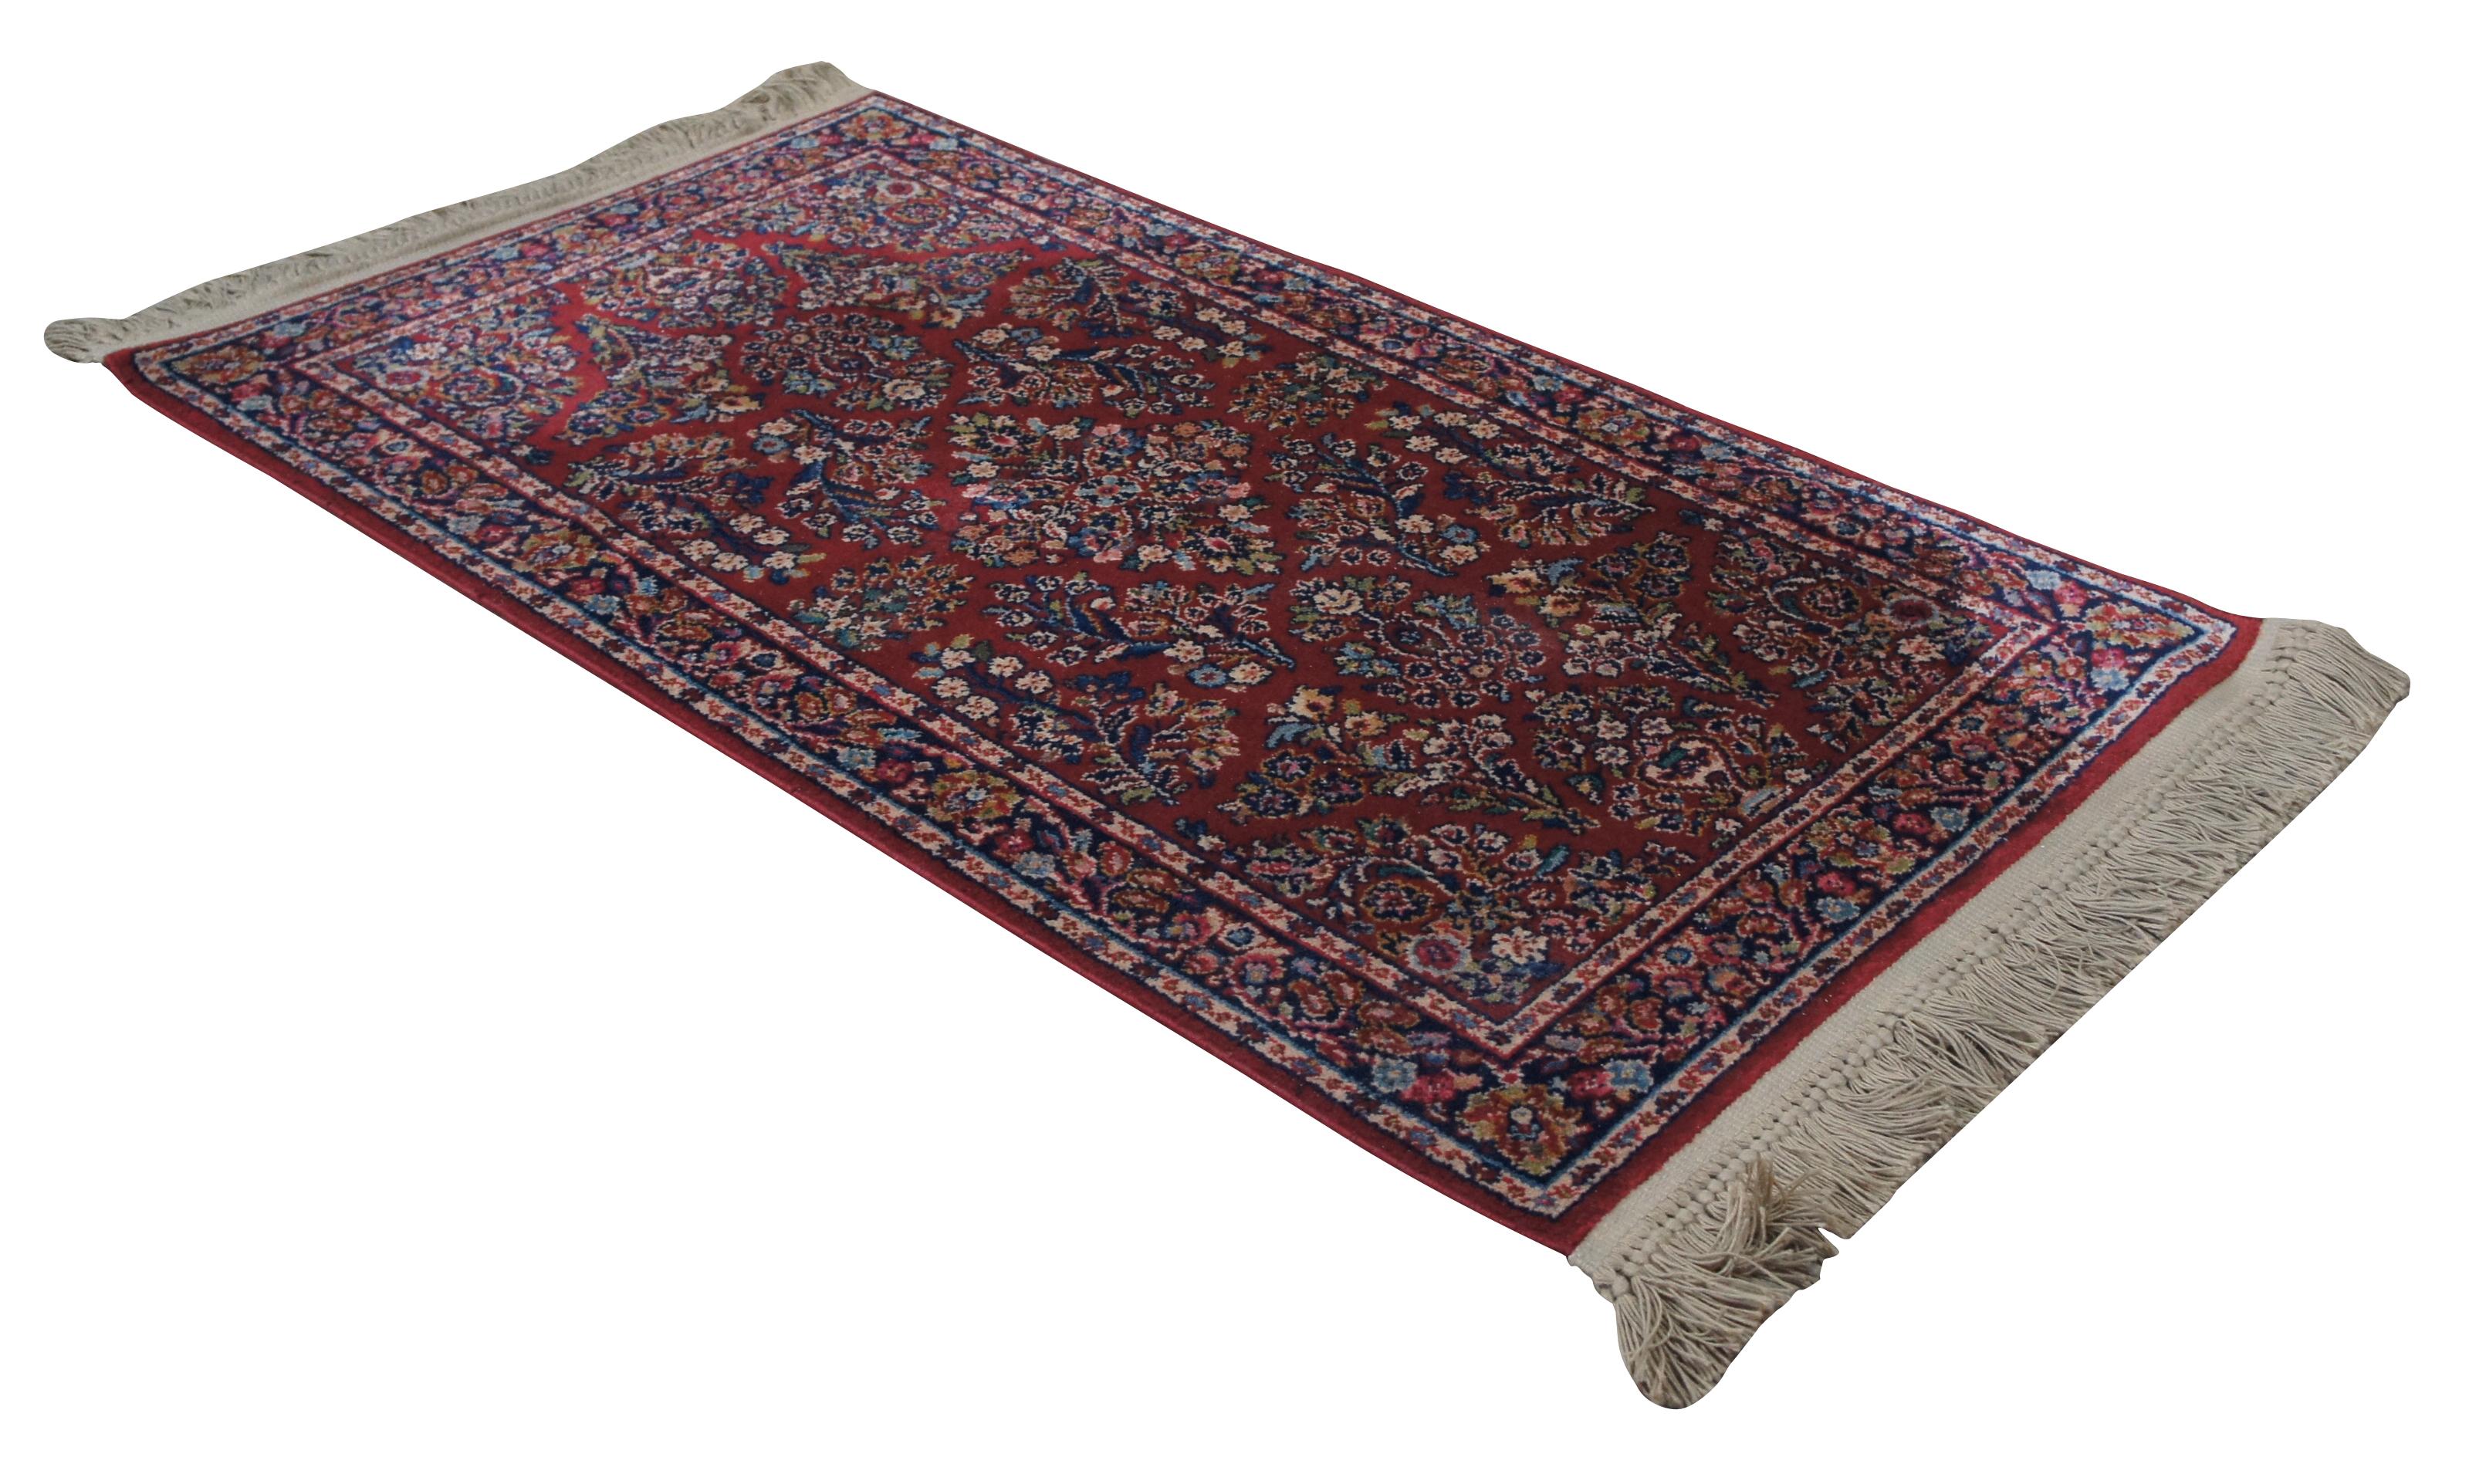 Karastan Design No. 785, Red Sarouk. Made of 100% Wool with a red background covered a floral design. Measures: 2.1 x 5'.